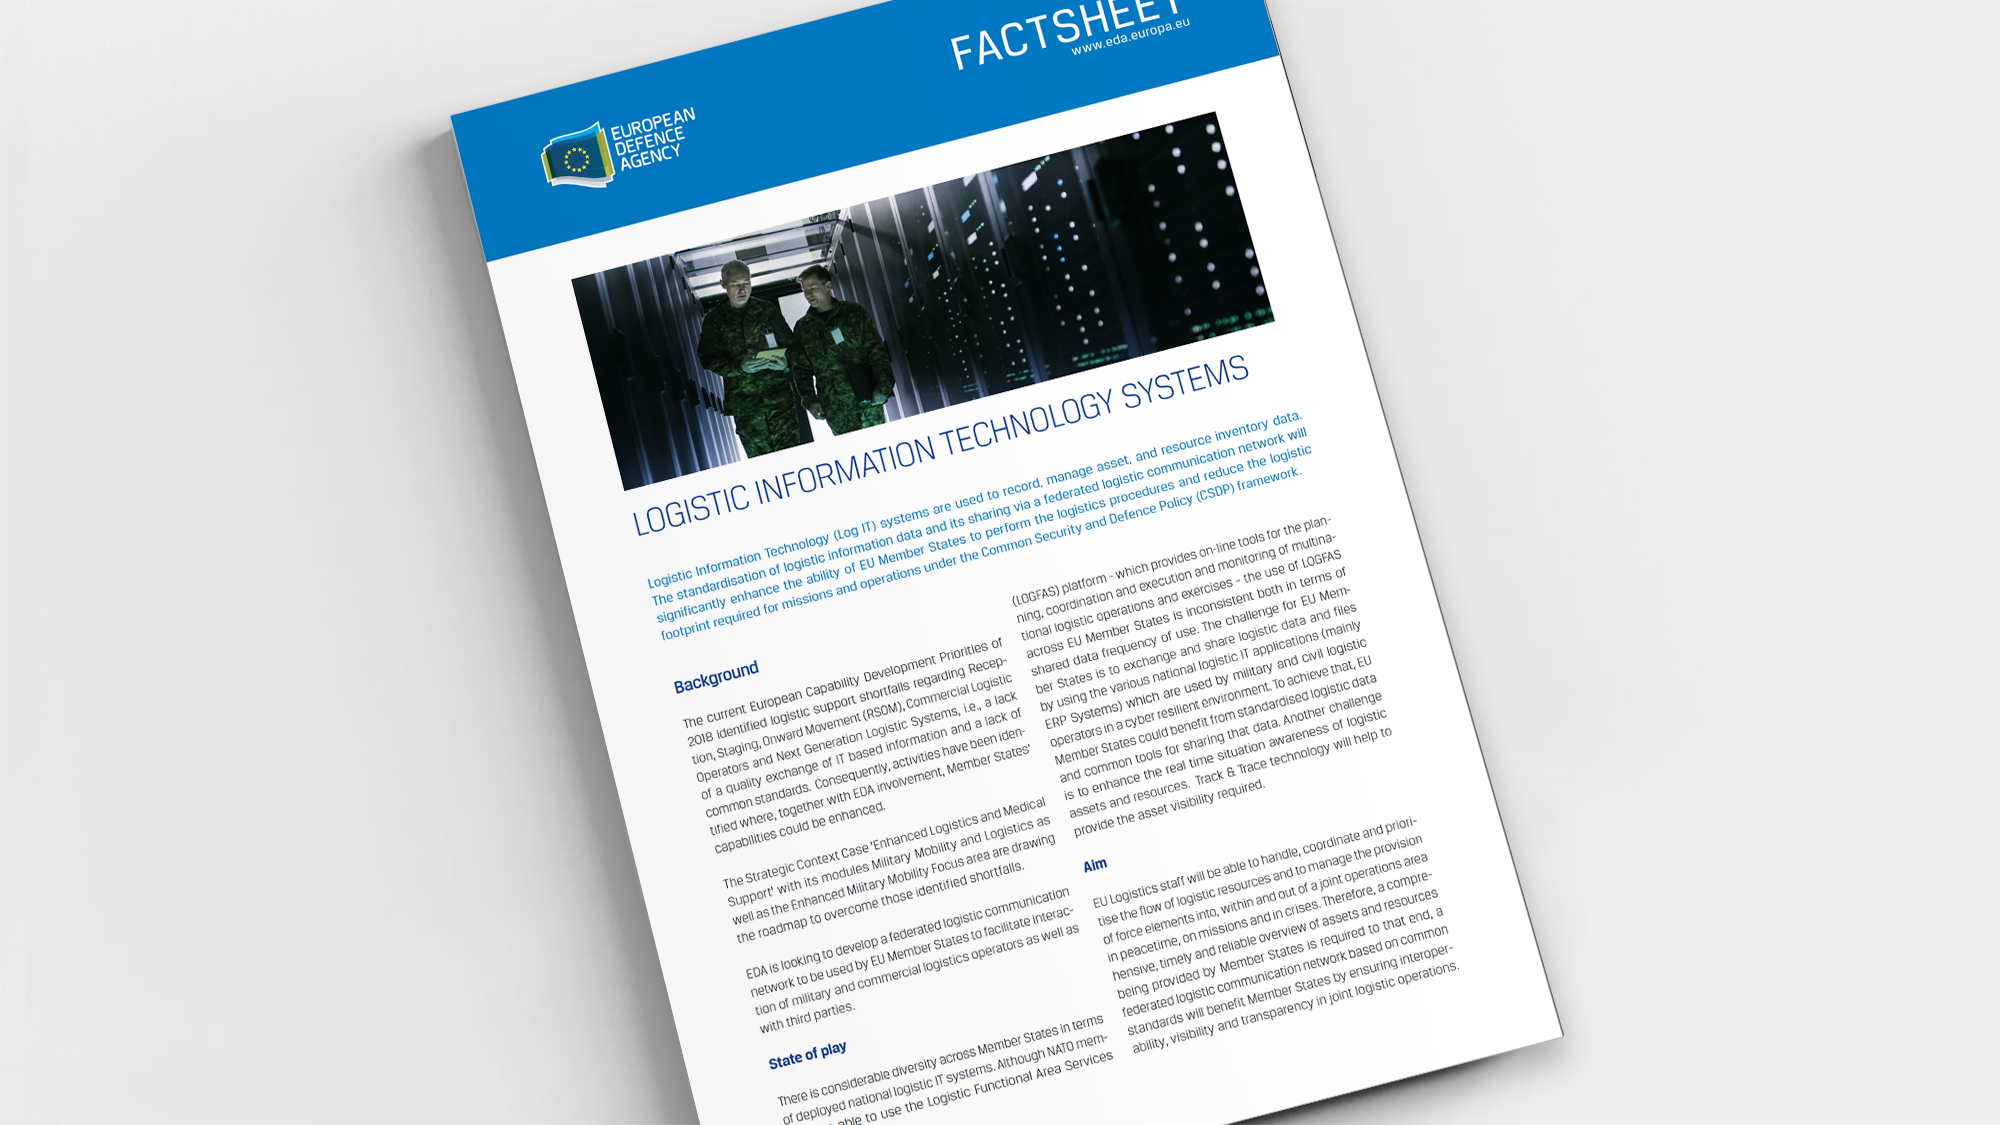 Factsheet: Logistic Information Technology Systems